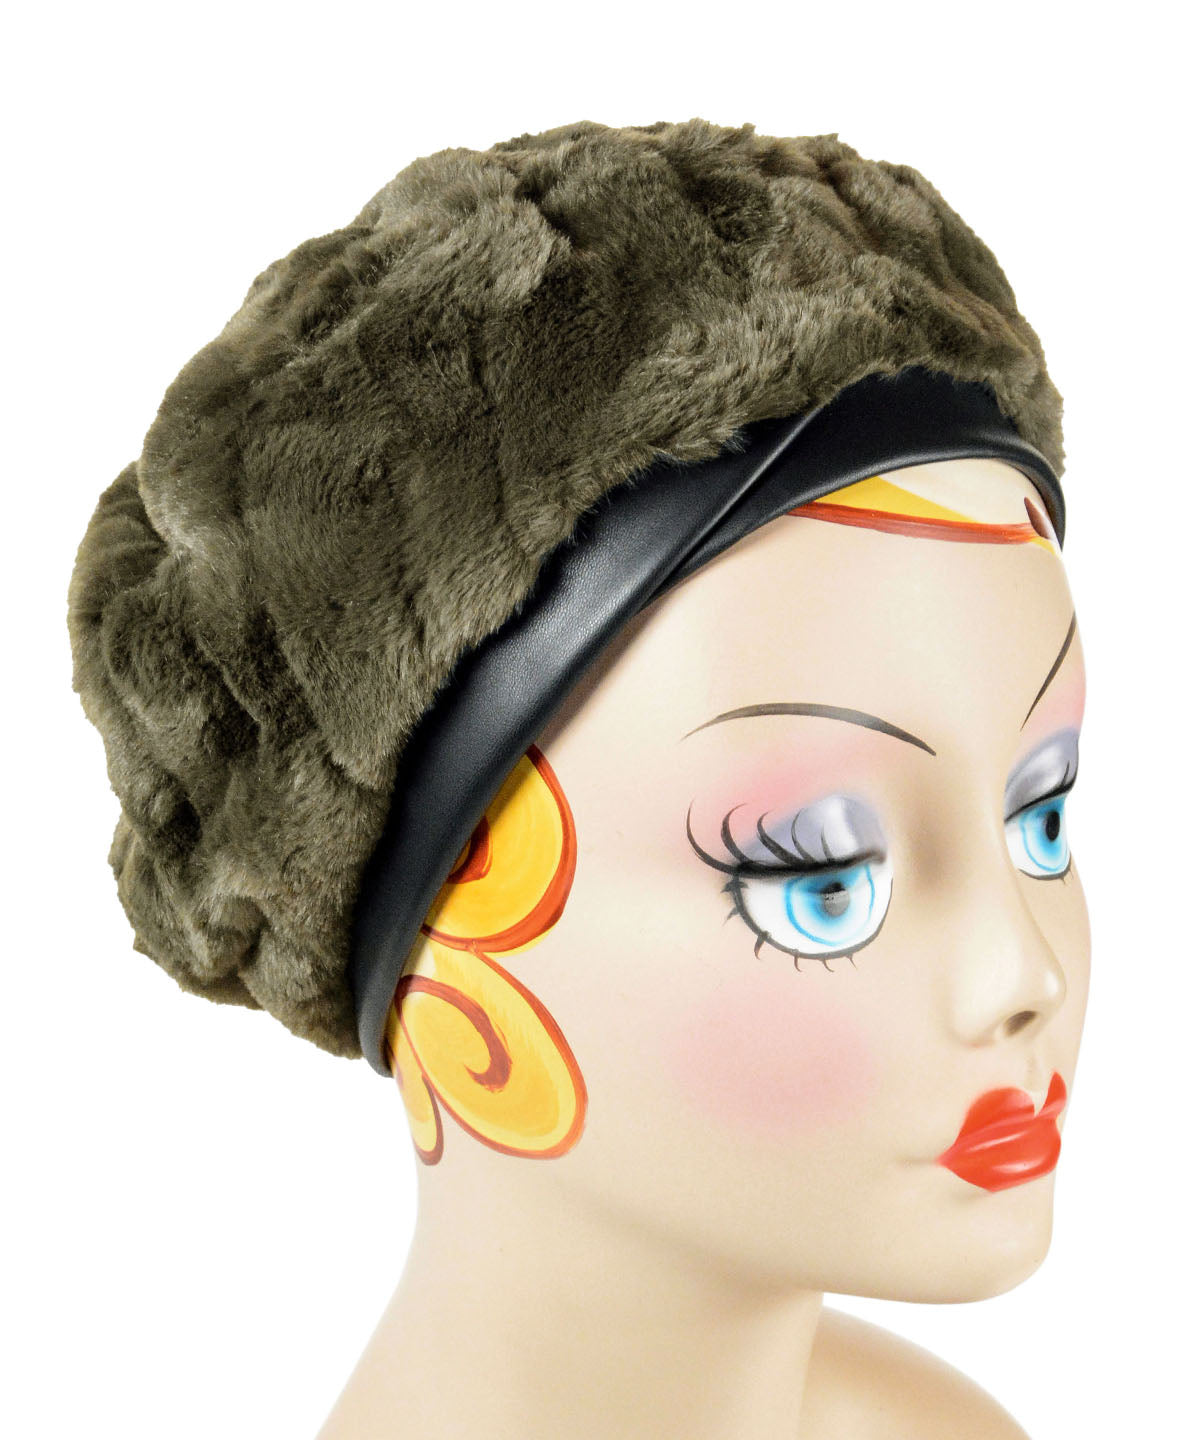 Reversible Beret  shown in Cuddly Army Green by Pandemonium Seattle. Handmade in America. 